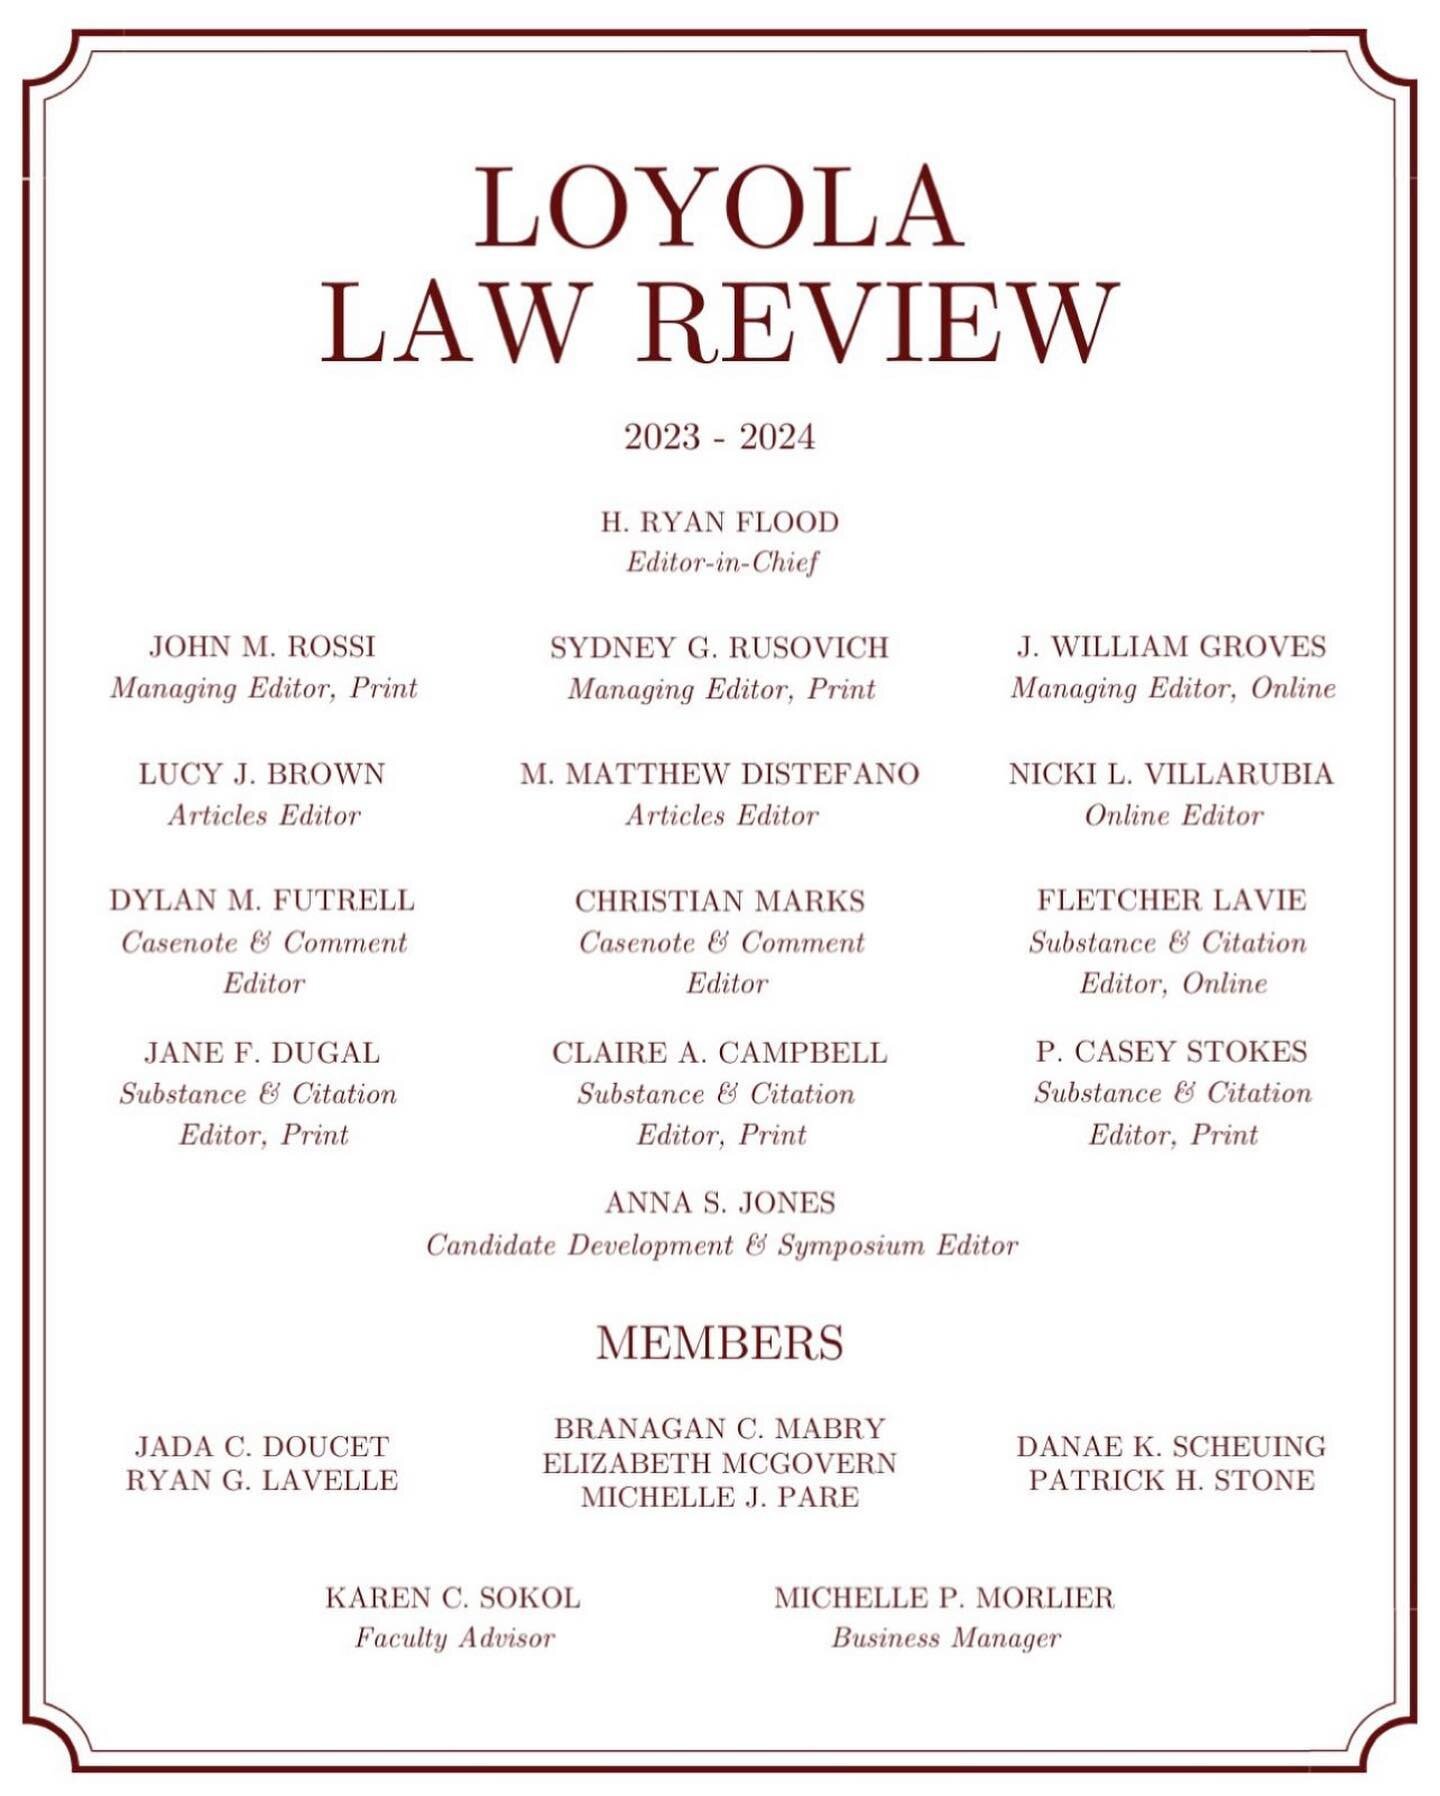 The Loyola Law Review is elated to announce the 2023-2024 Editorial Board for Volume 70 of the review. Congratulations and we look forward to what you all will accomplish!